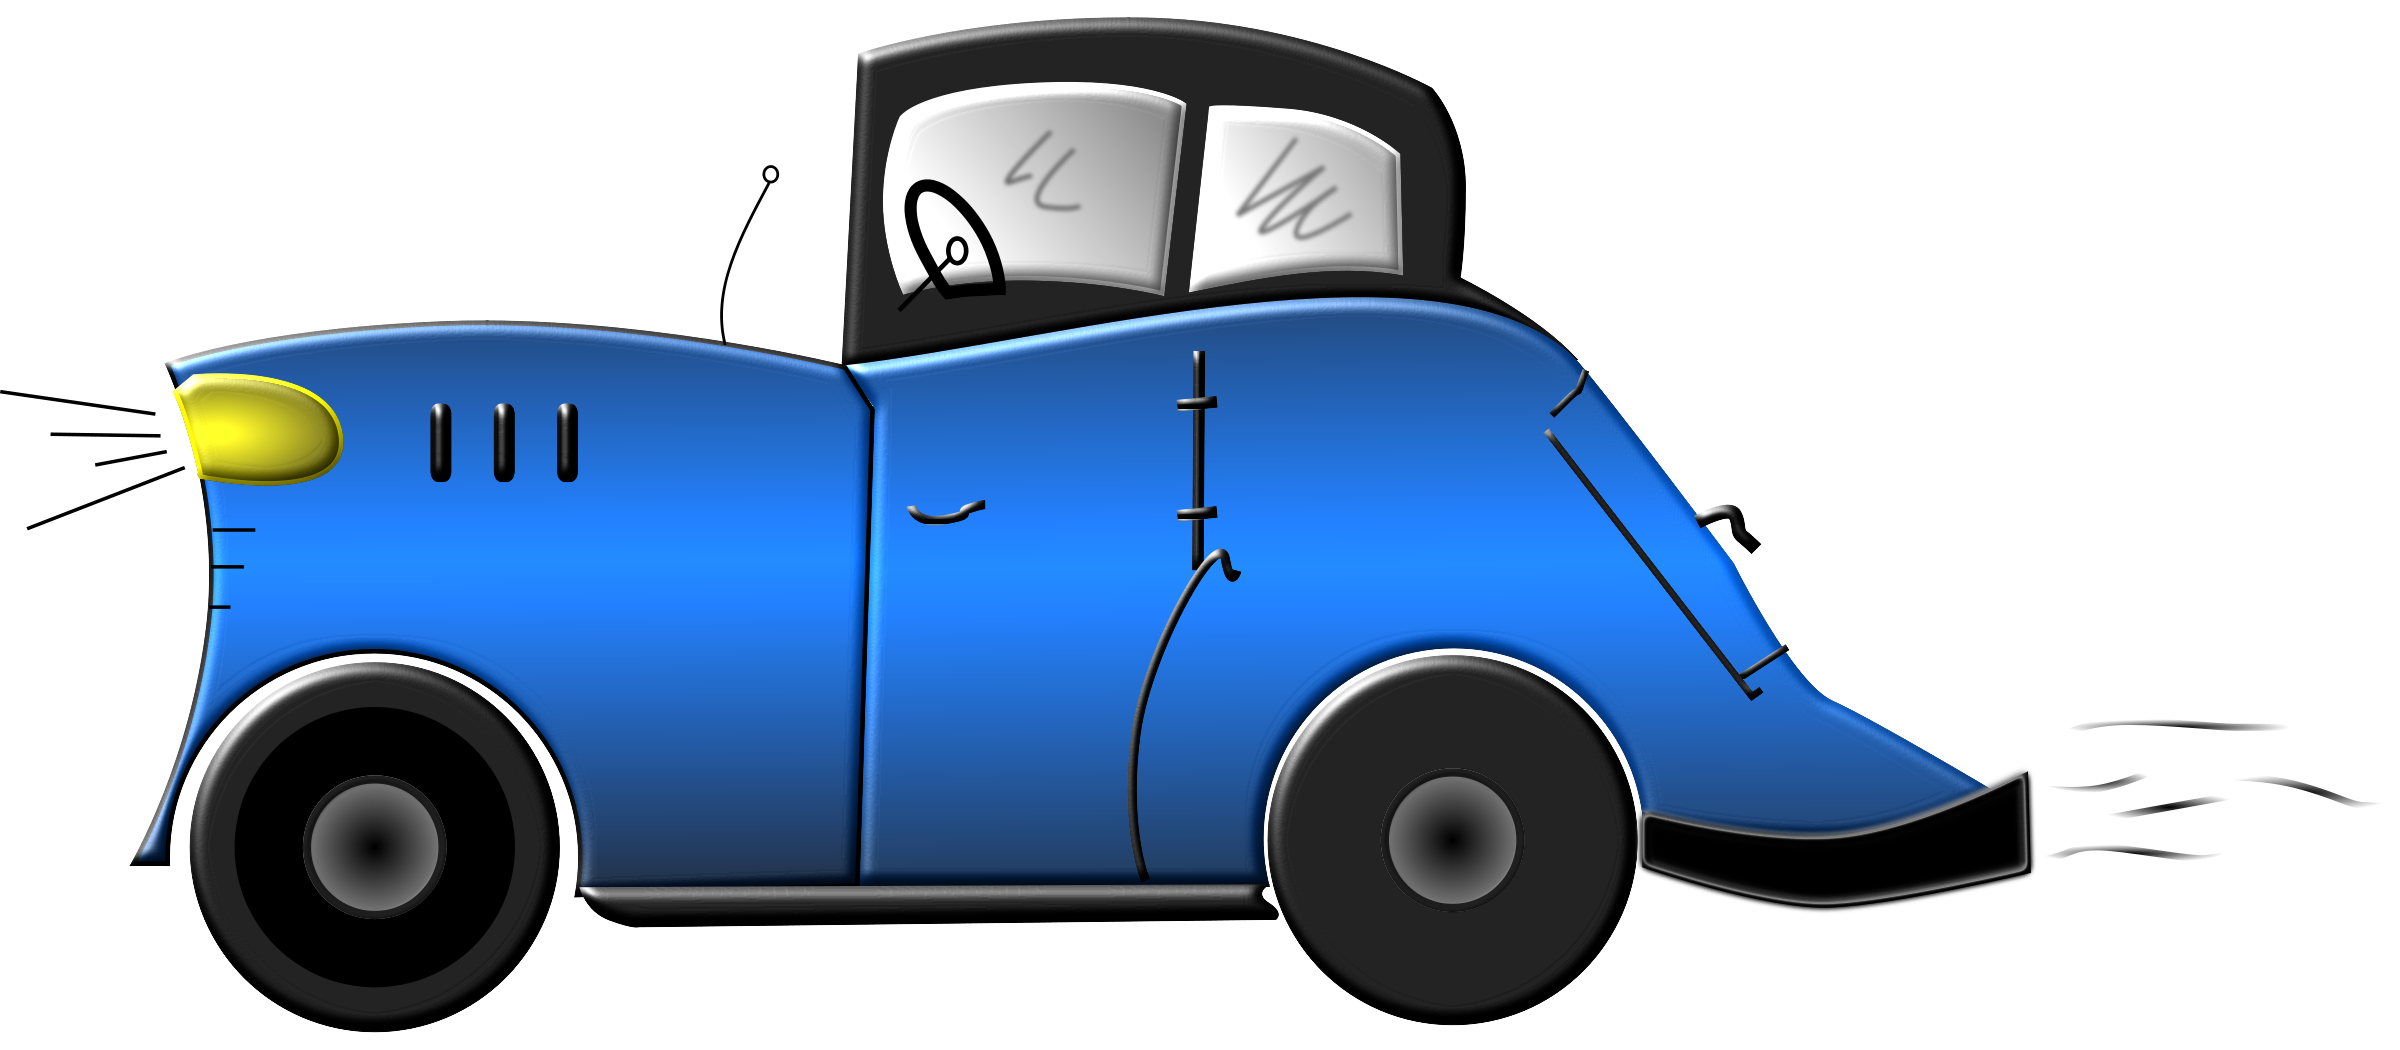 free clipart images cartoon cars - photo #18